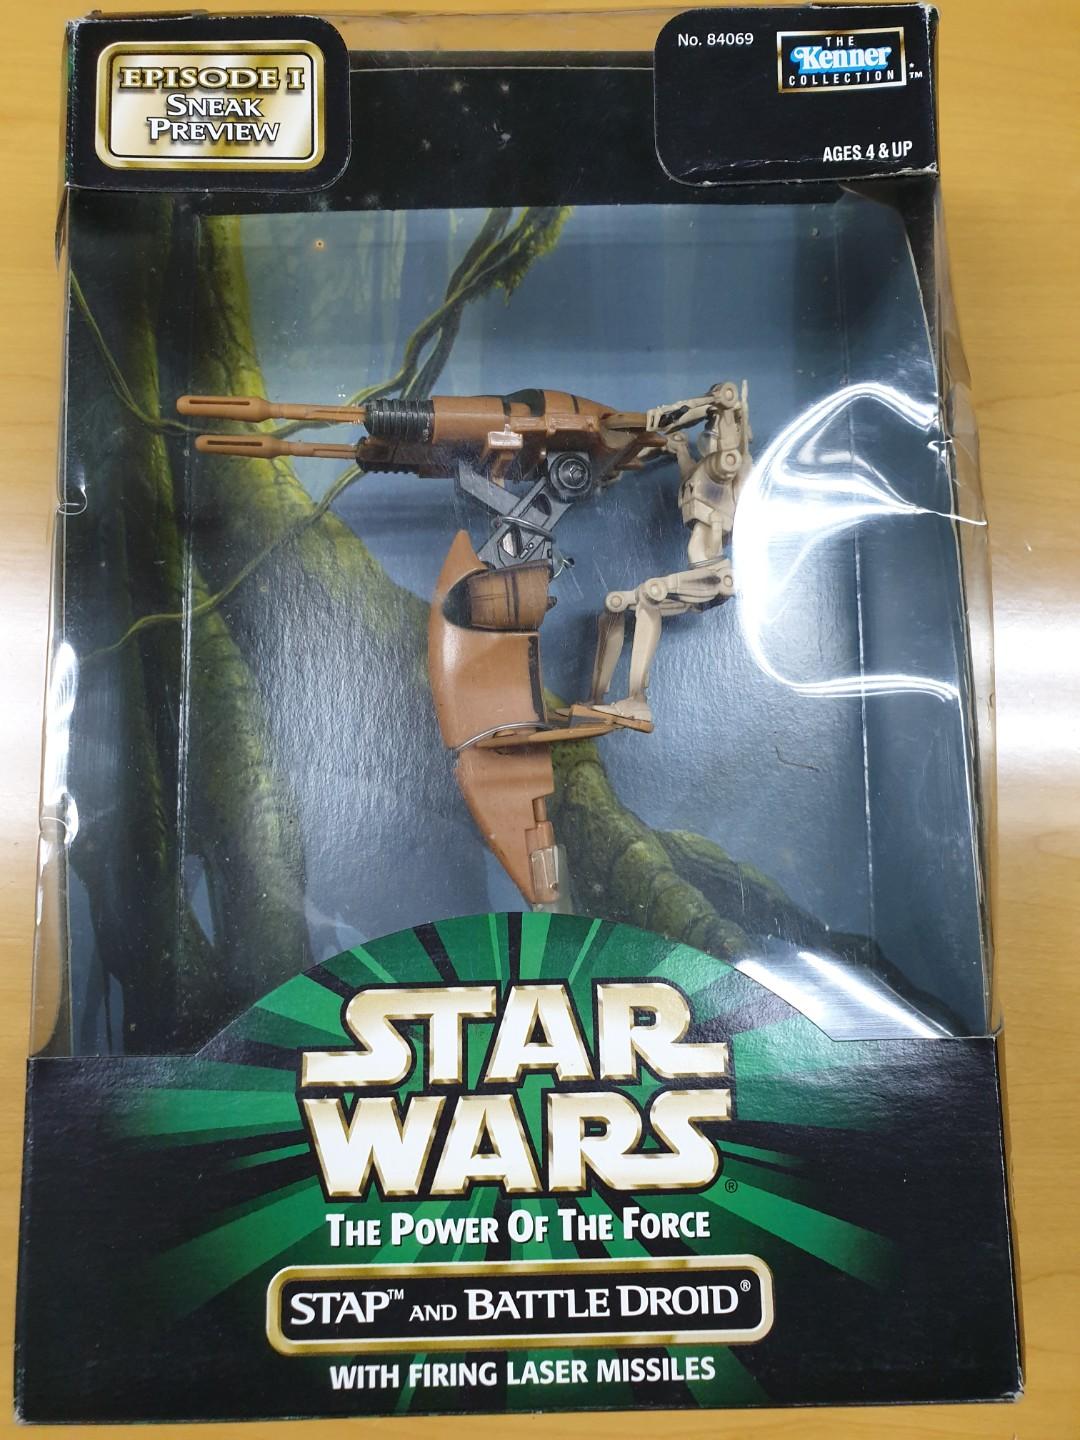 Kenner Star Wars Stap And Battle Droid Potf Action Figure for sale online 